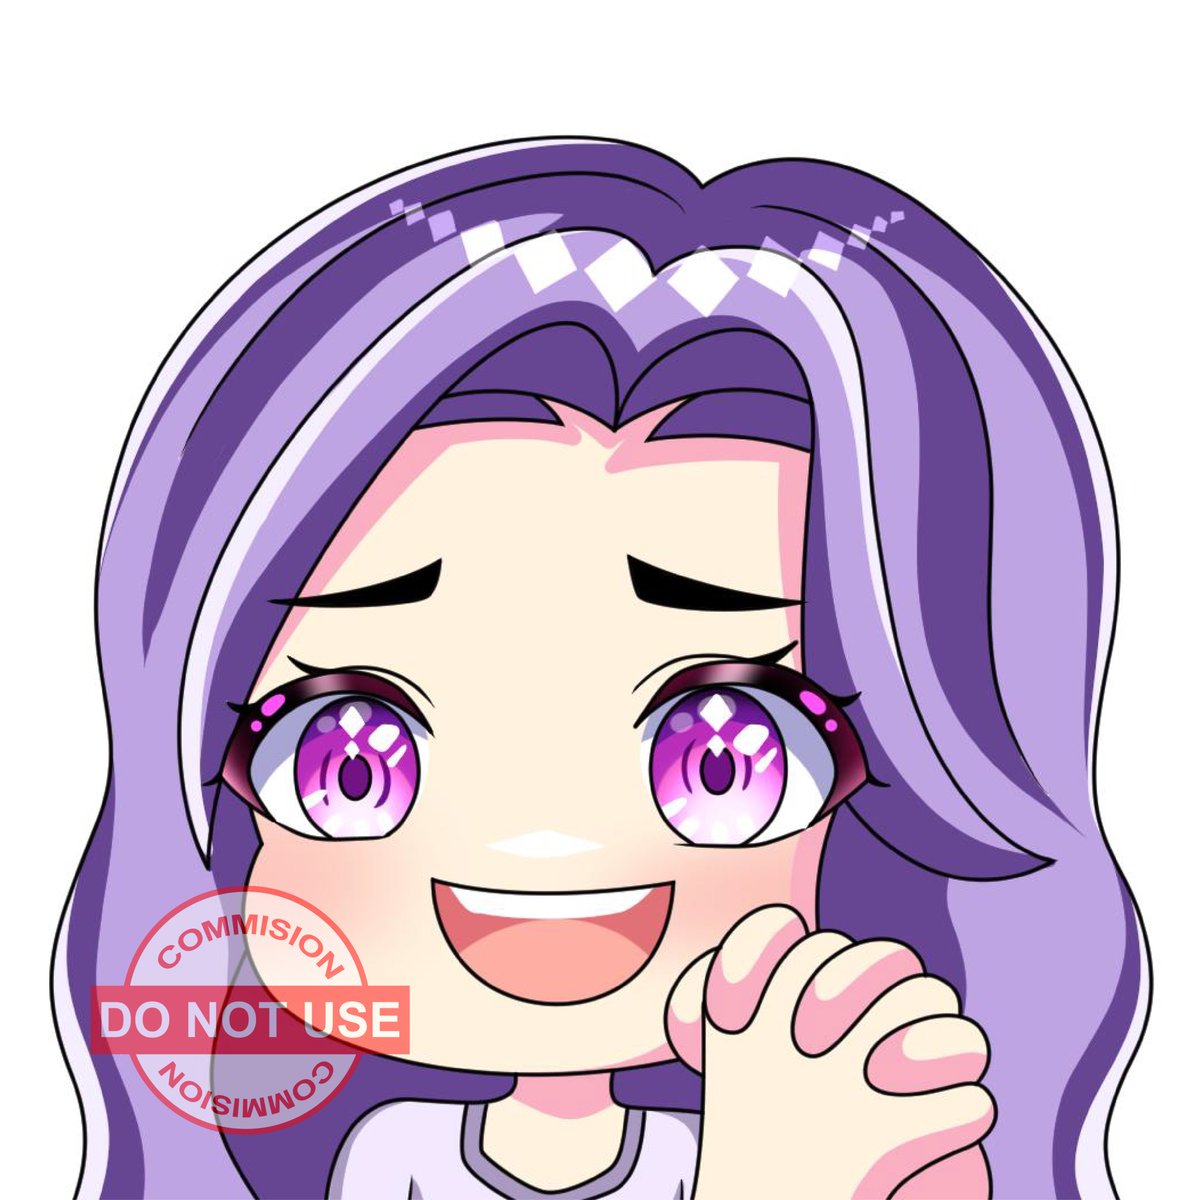 Yay, I'm so excited that one commission has been successfully completed and already sent to the client!

#twitchstreamer #emotes  #opencommissions #TwitchEmotes #ChibiEmotes #EmoteDesign #EmoteArtist #ChibiArt  #StreamerArt